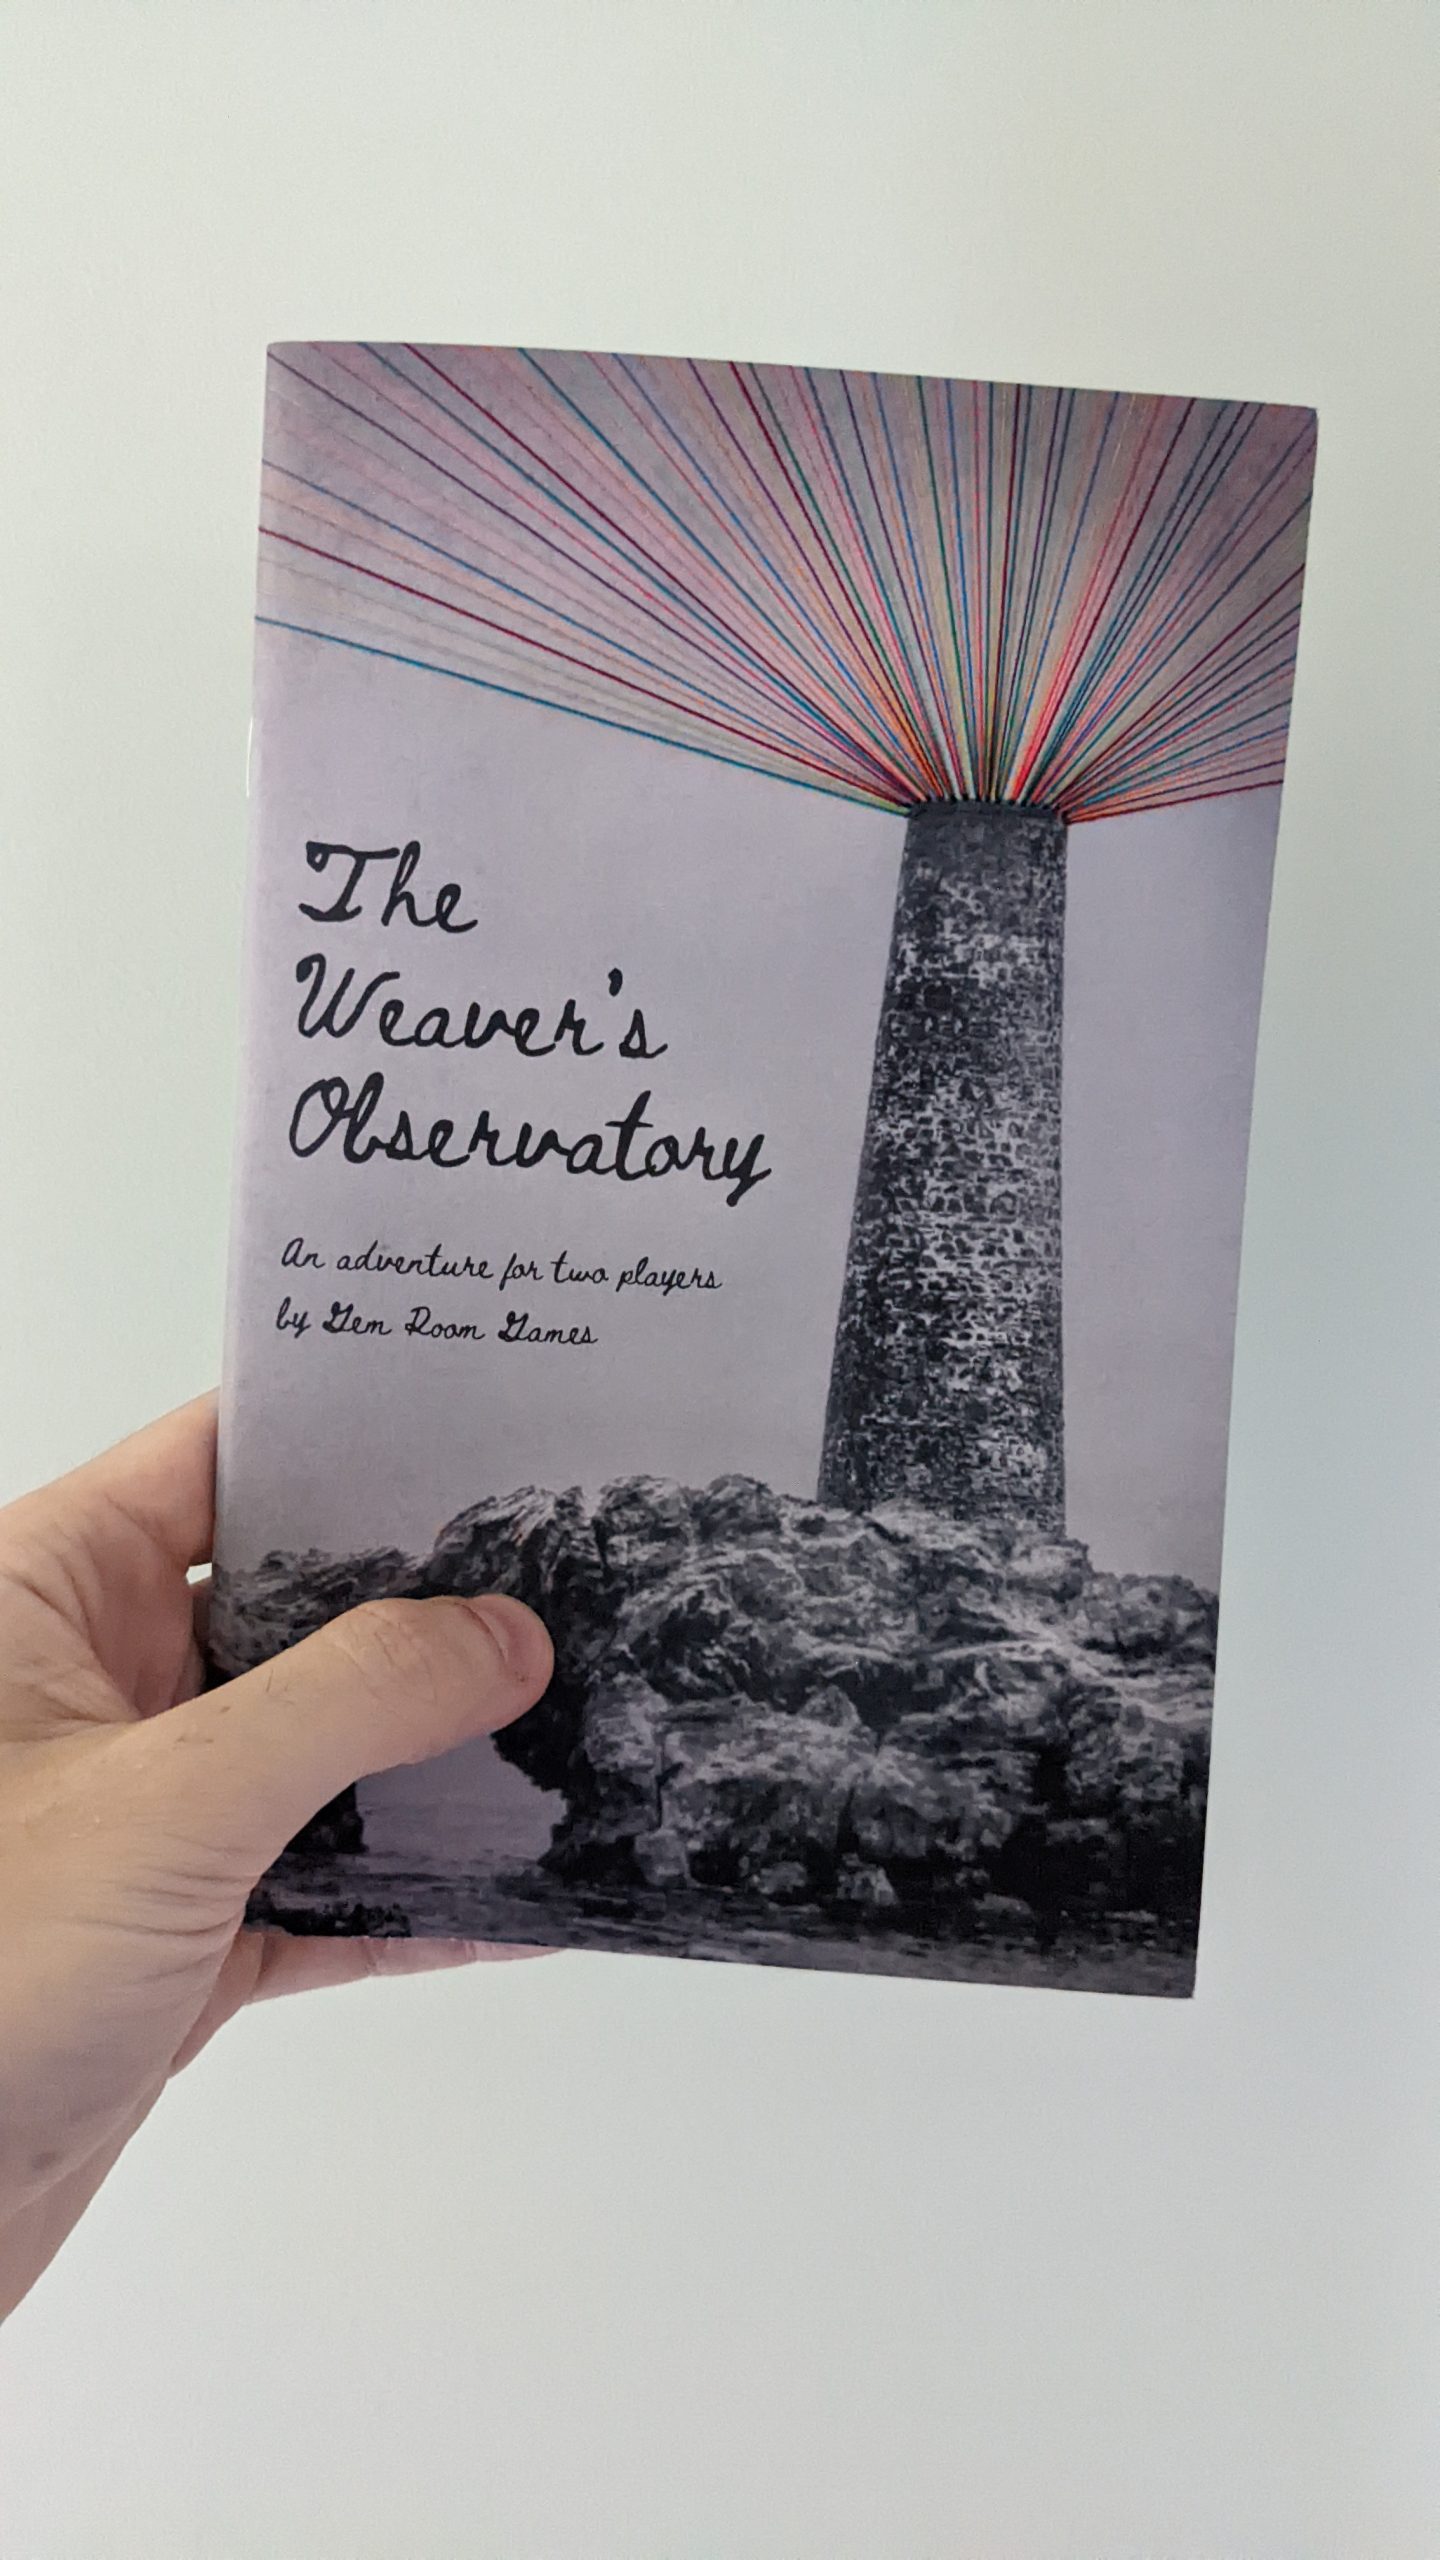 An A% zine. The cover shows a lighthouse with multicolour threads of string ascending from the cuppola. The title reads "The Weaver's Observatory".